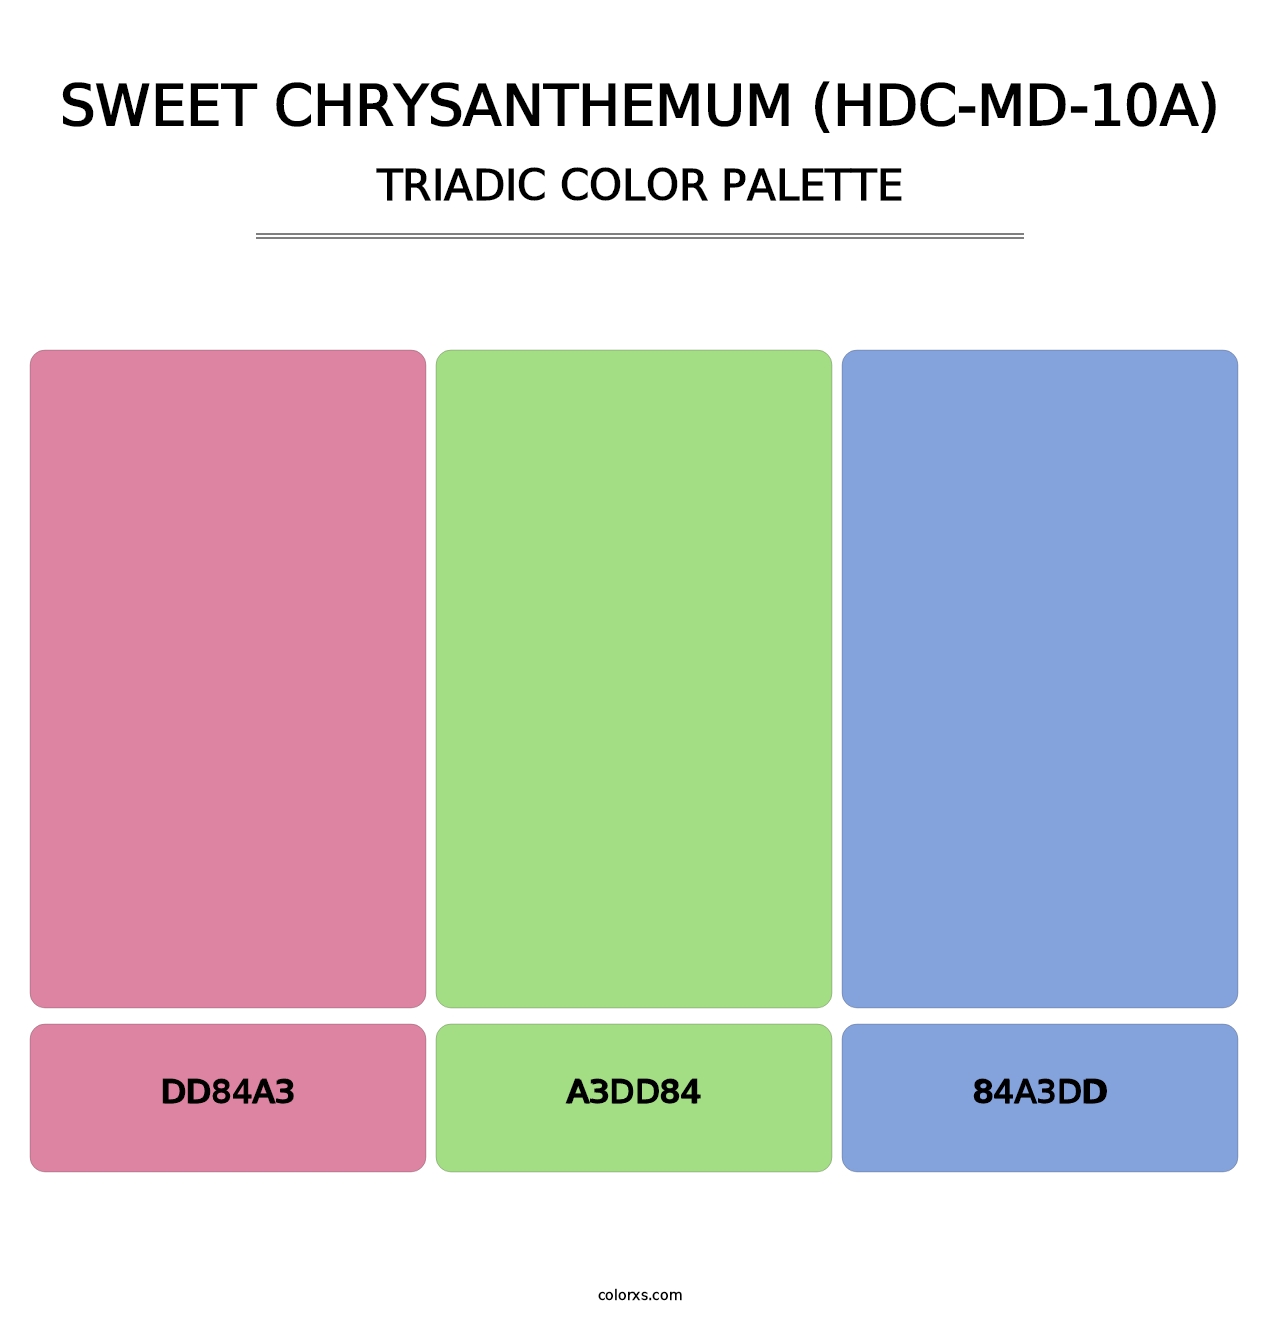 Sweet Chrysanthemum (HDC-MD-10A) - Triadic Color Palette